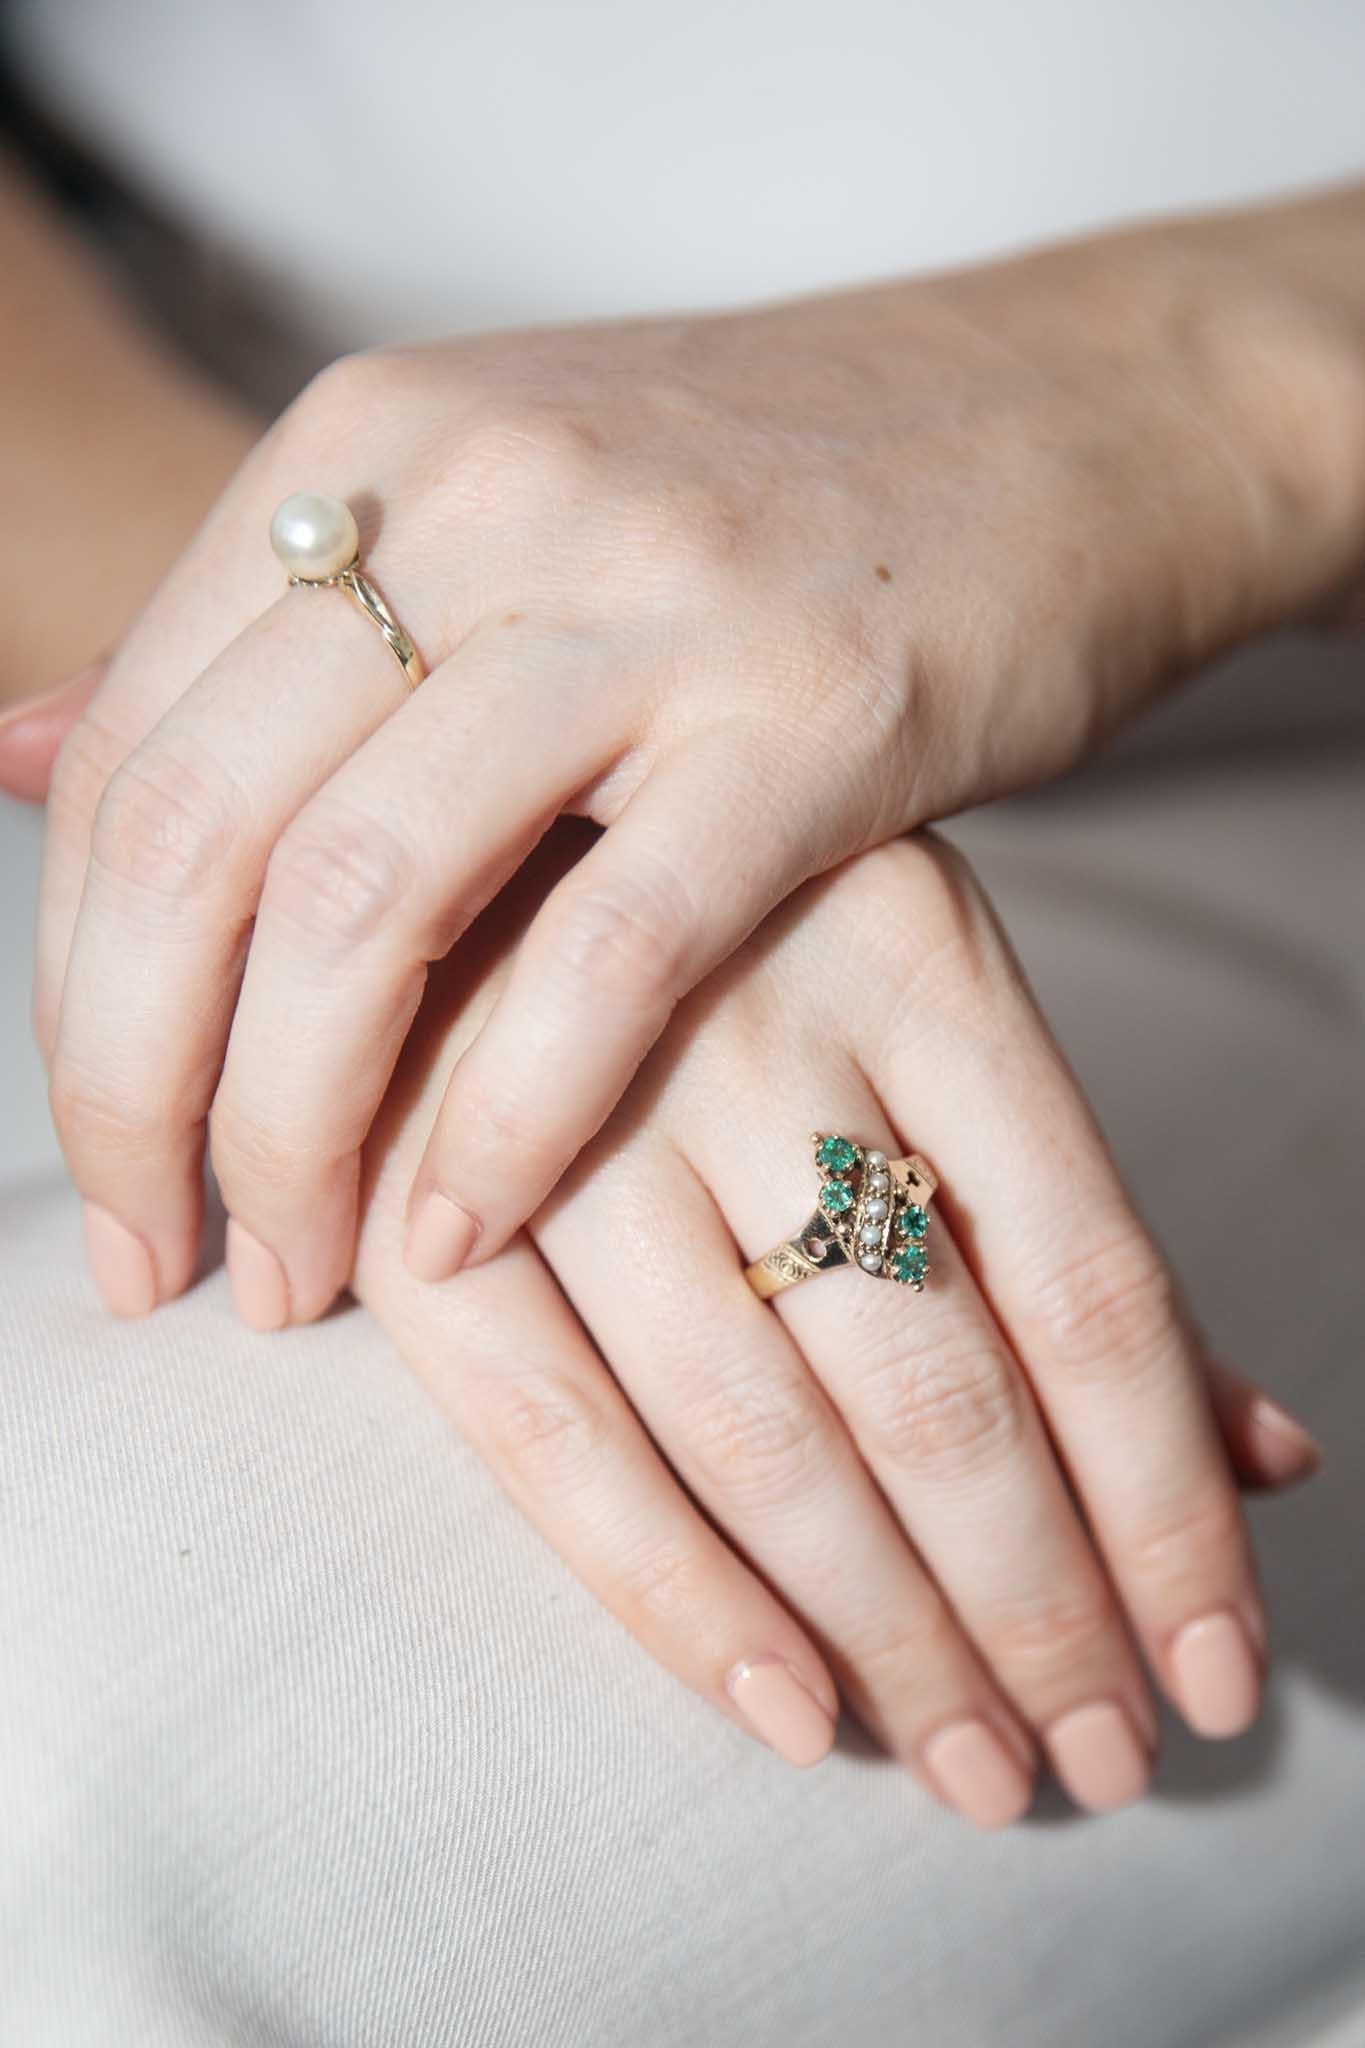 Beautifully crafted in 9 carat gold, The Sarai Ring is a vintage delight.  With her band lightly patterned and shining emeralds separated by a gently winding river of satiny seed pearls, she is a sweet inclusion in your jewellery collection.

The